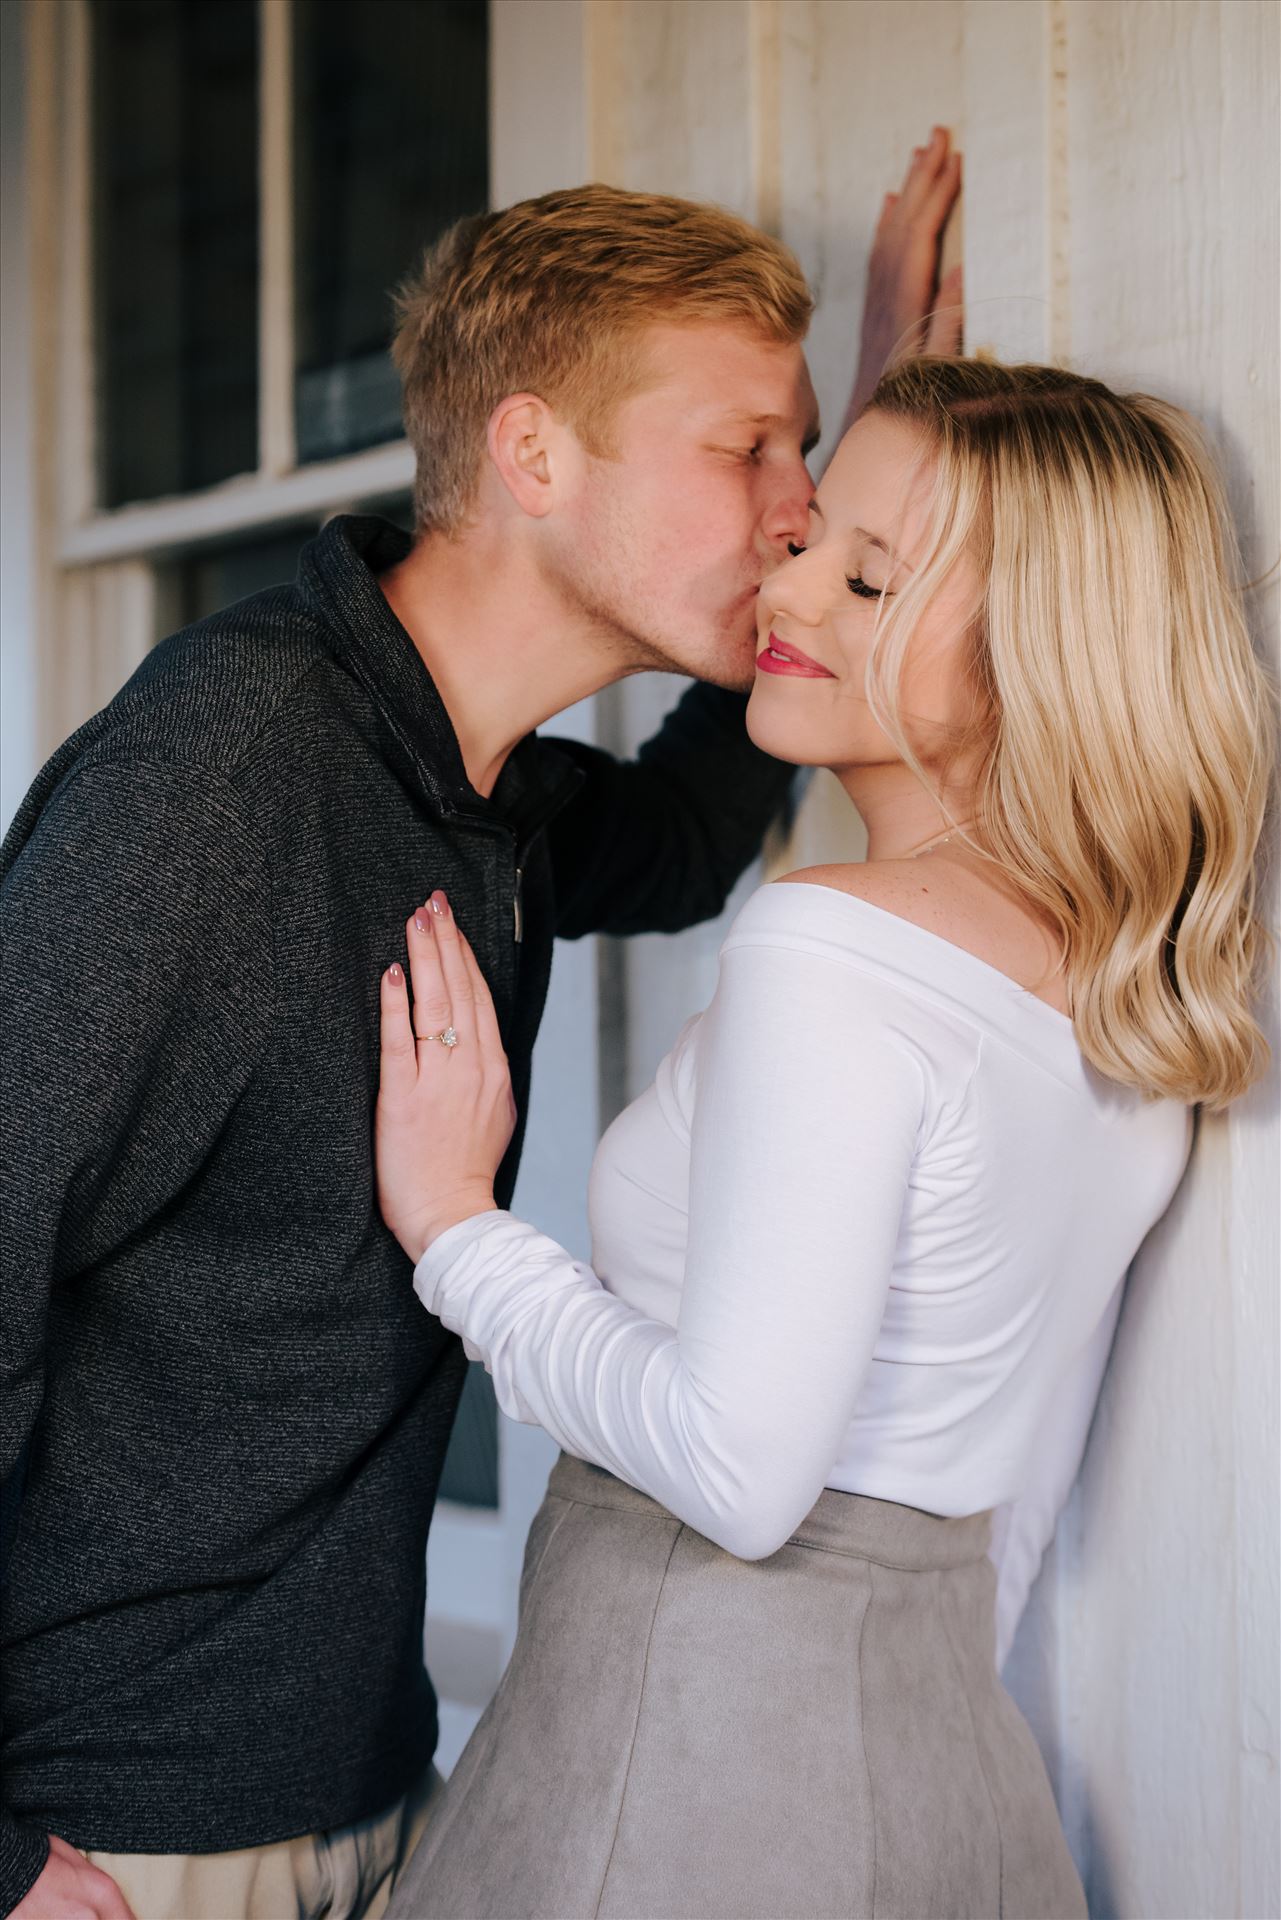 DSC_2887.JPG San Luis Obispo and Santa Barbara County Wedding and Engagement Photography. Mirror's Edge Photography captures Montana de Oro Engagement Session.  The kiss. by Sarah Williams